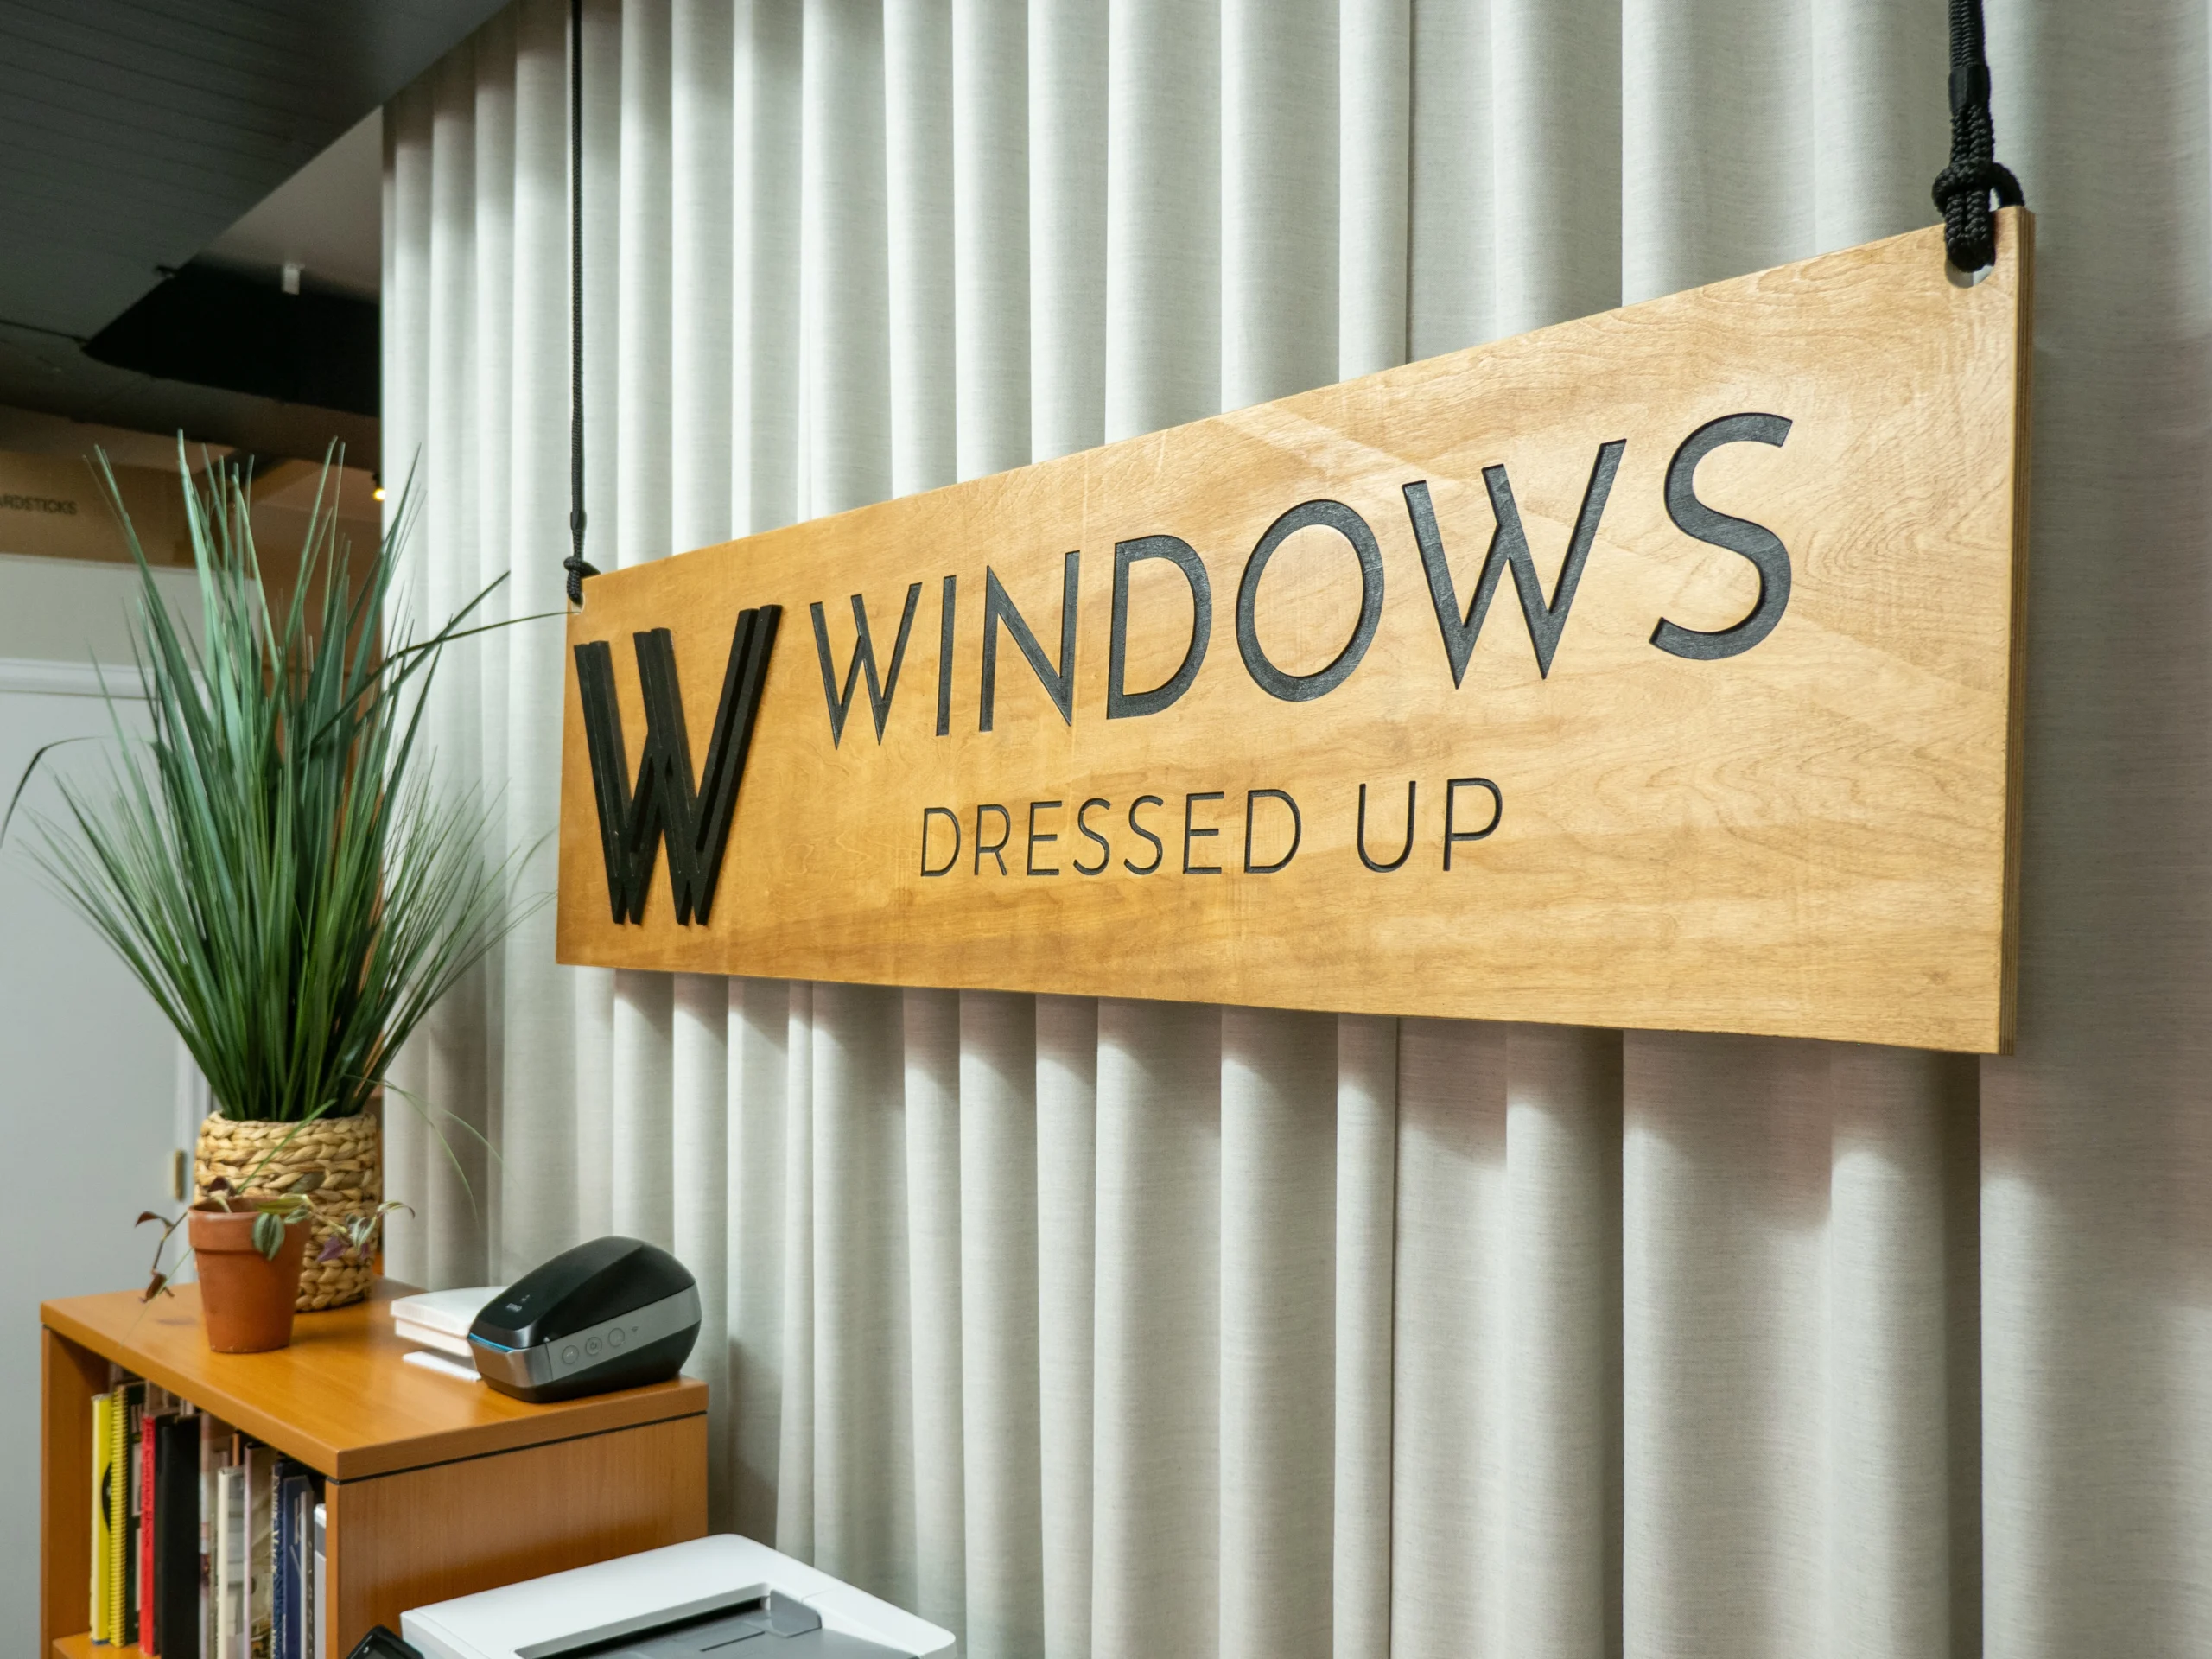 Wooden sign reading "windows dressed up" hanging in an office, with a potted plant and drapery in the background.